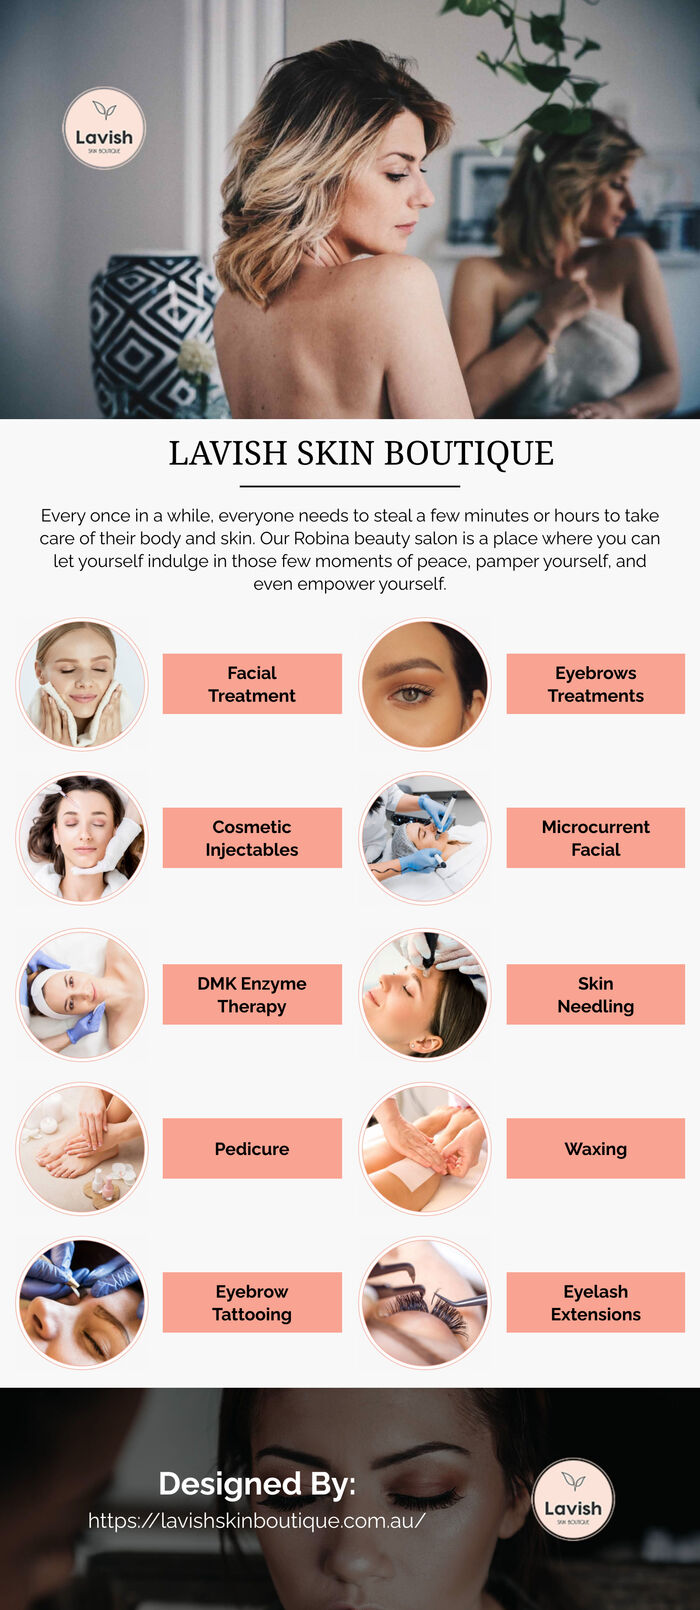 This infographic is designed by Lavish Skin Boutique